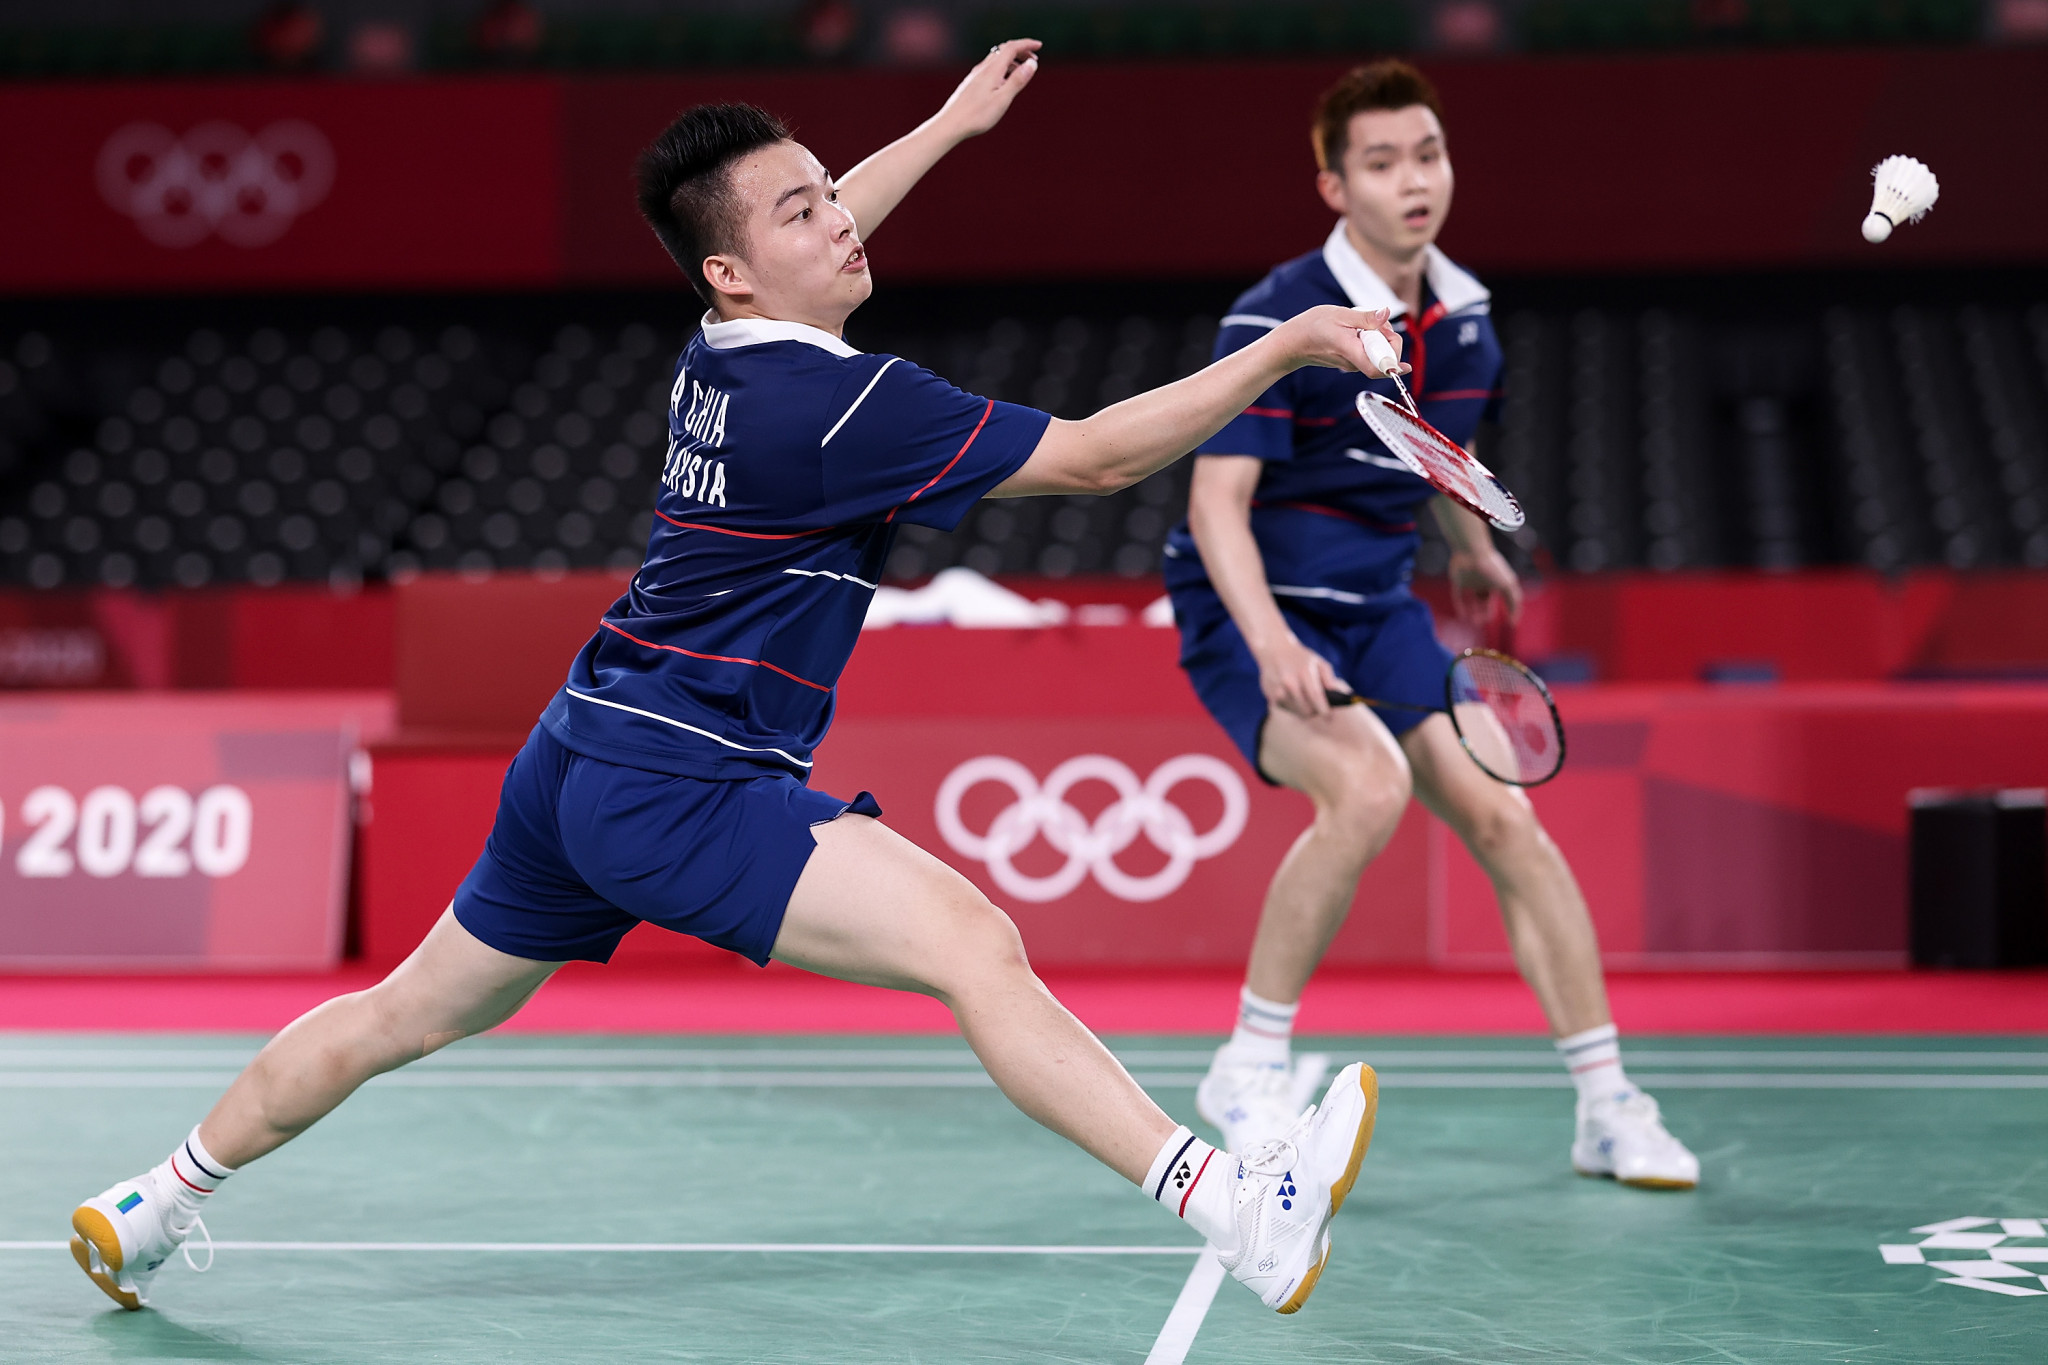 Malaysia's Olympic bronze medallists Aaron Chia and Soh Wooi Yik came from behind to beat Leo Rolly Carnando and Daniel Marthin of Indonesia in the men's final at the Badminton Asia Team Championships ©Getty Images